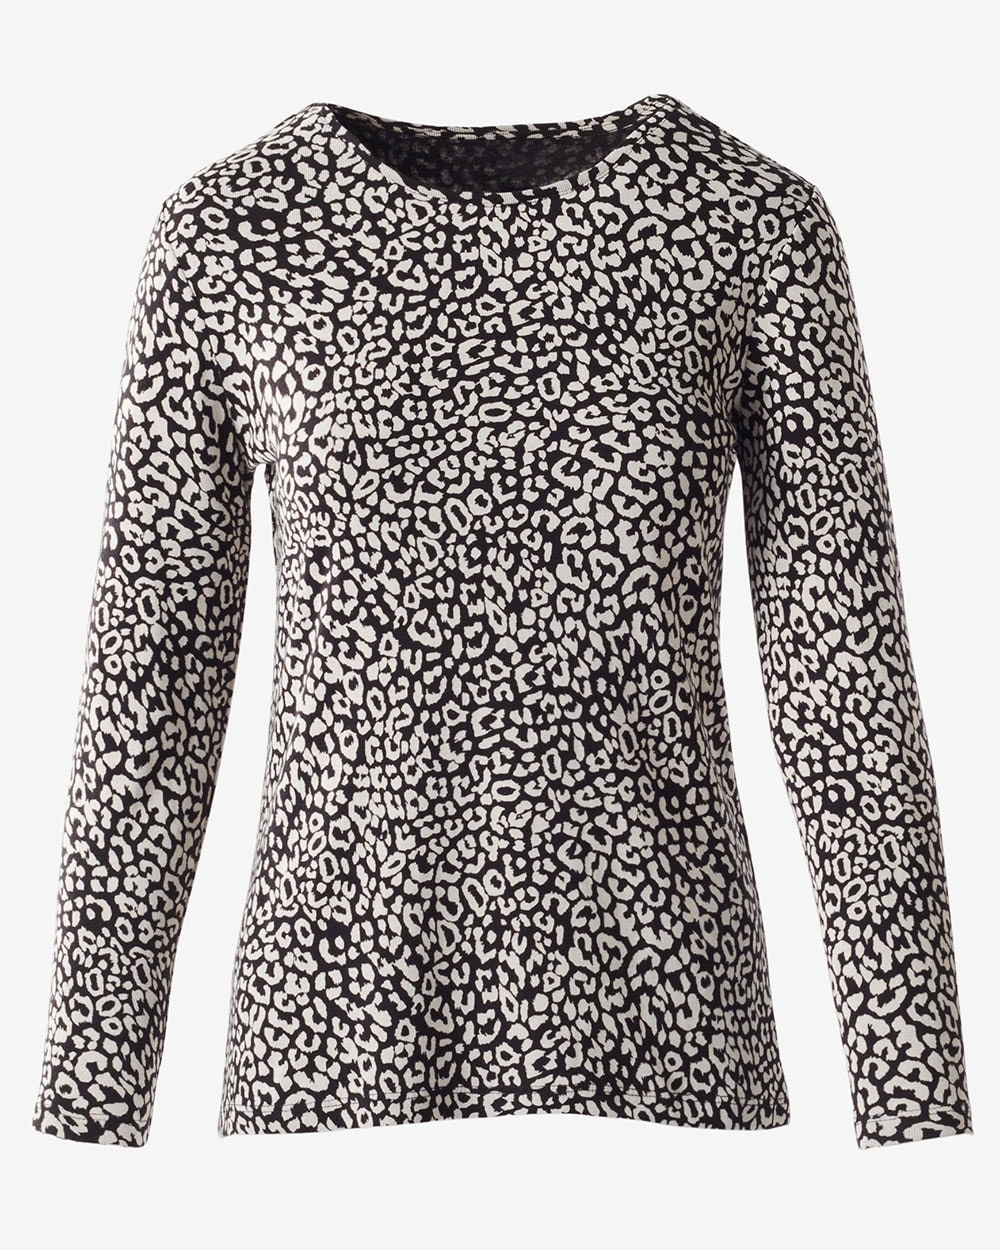 Graphic Leopard Long-Sleeve Tee